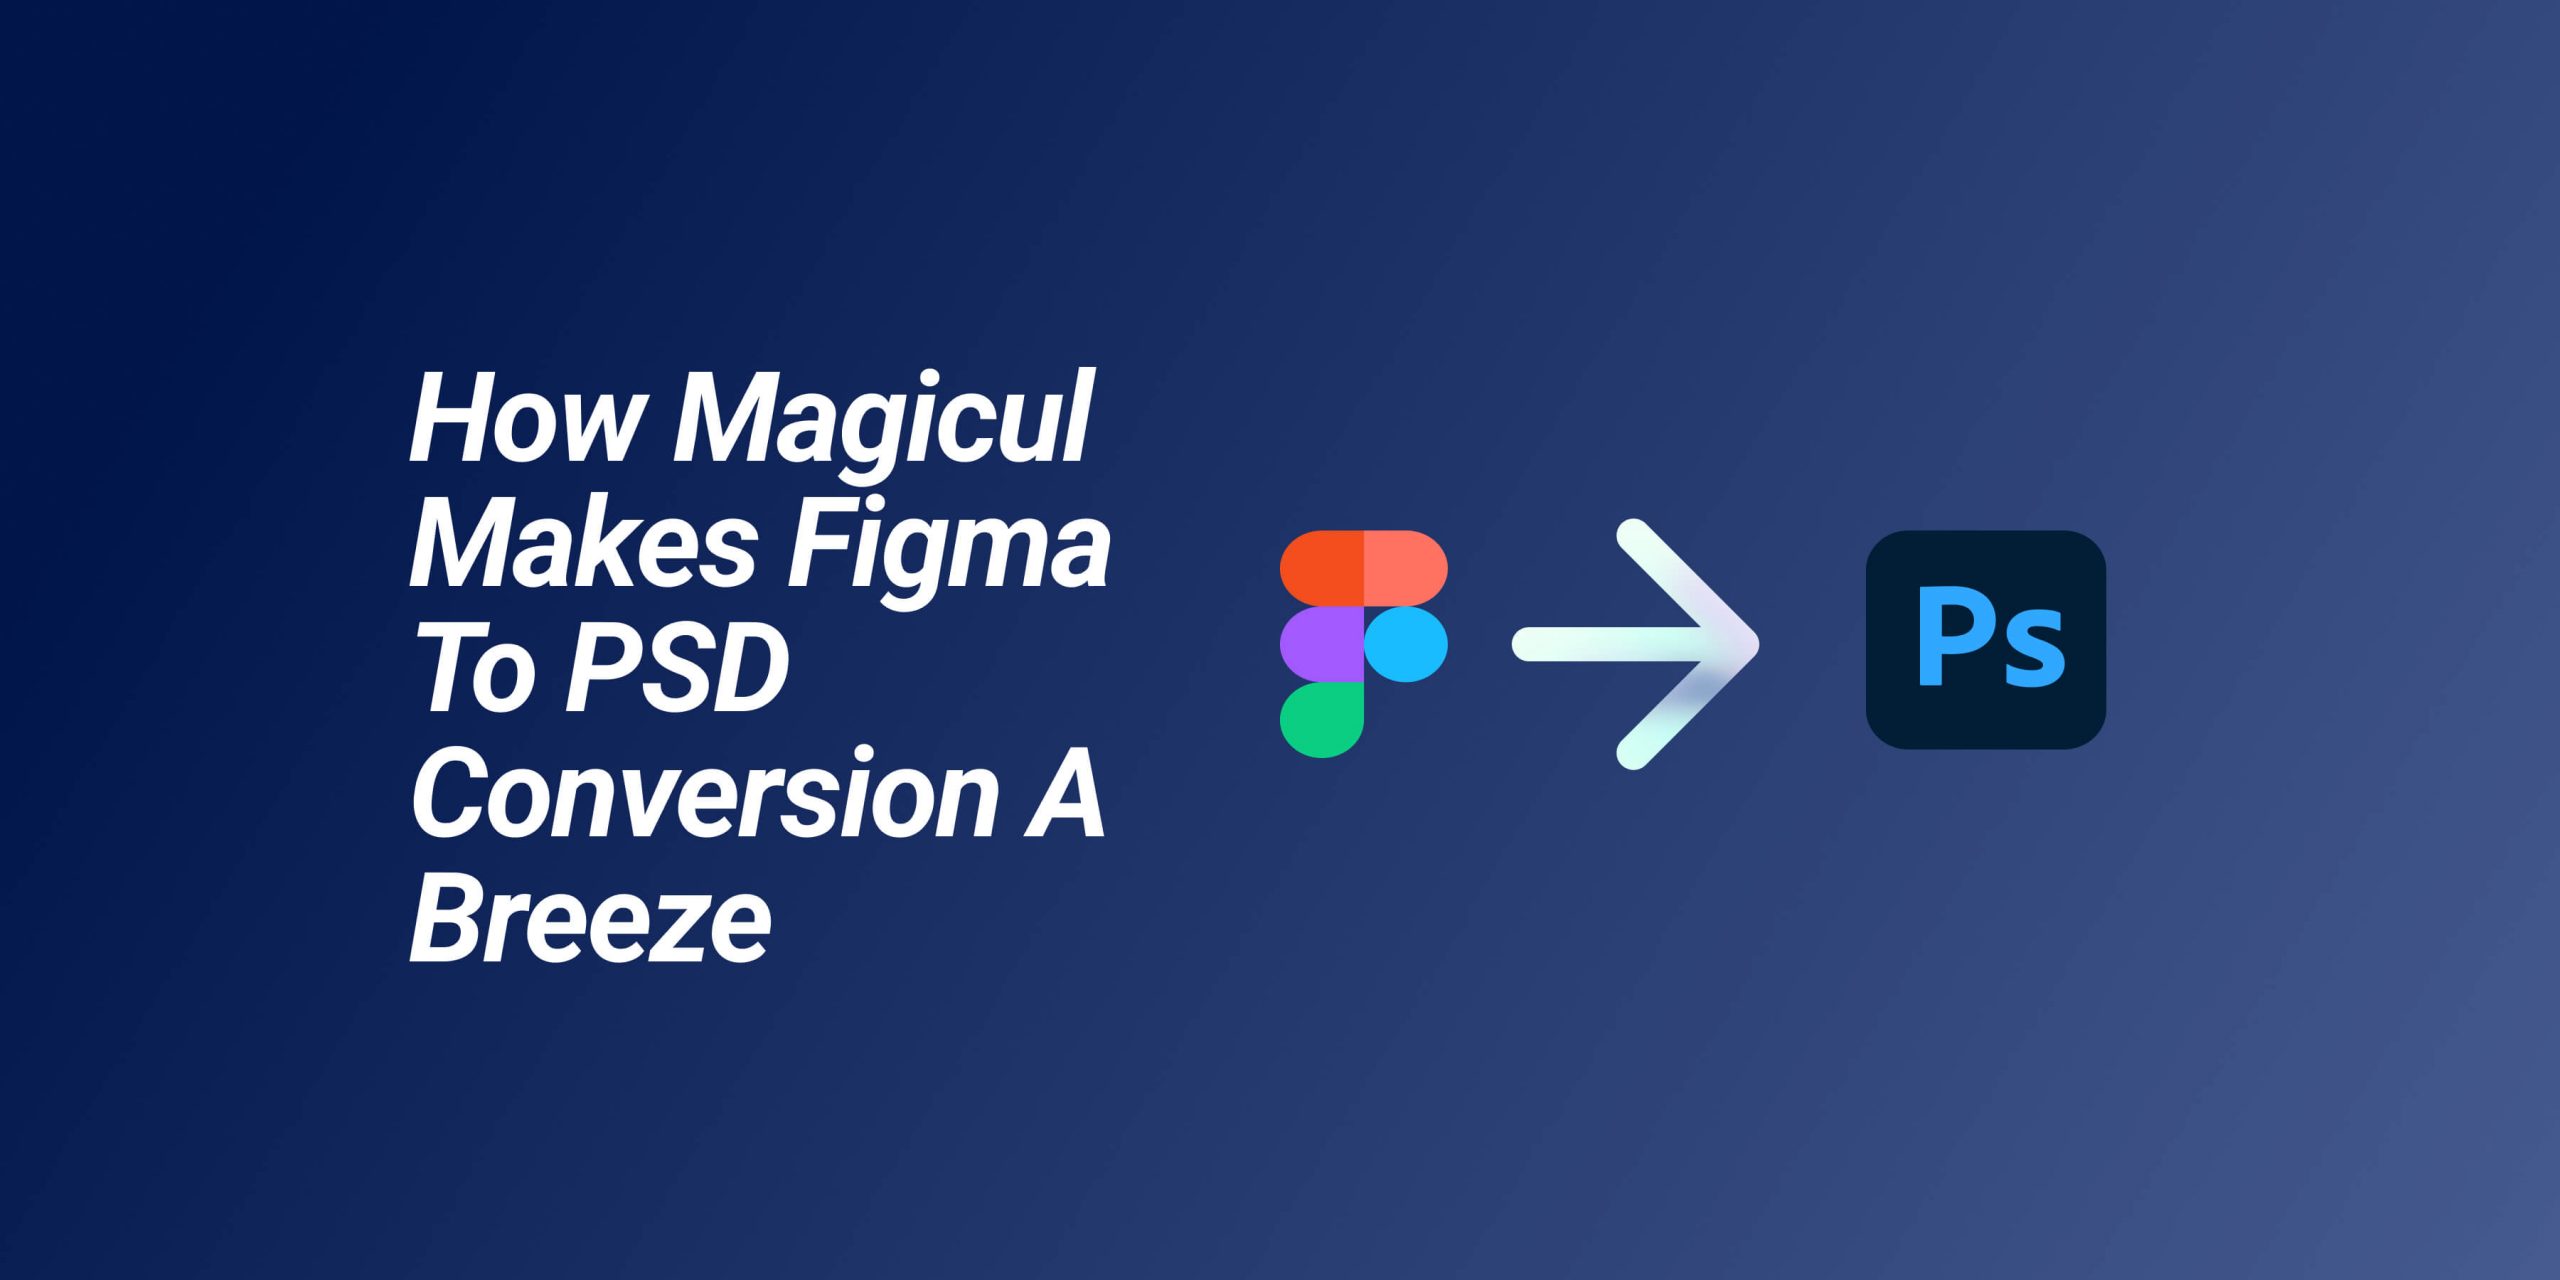 How magicul makes figma to psd a breeze